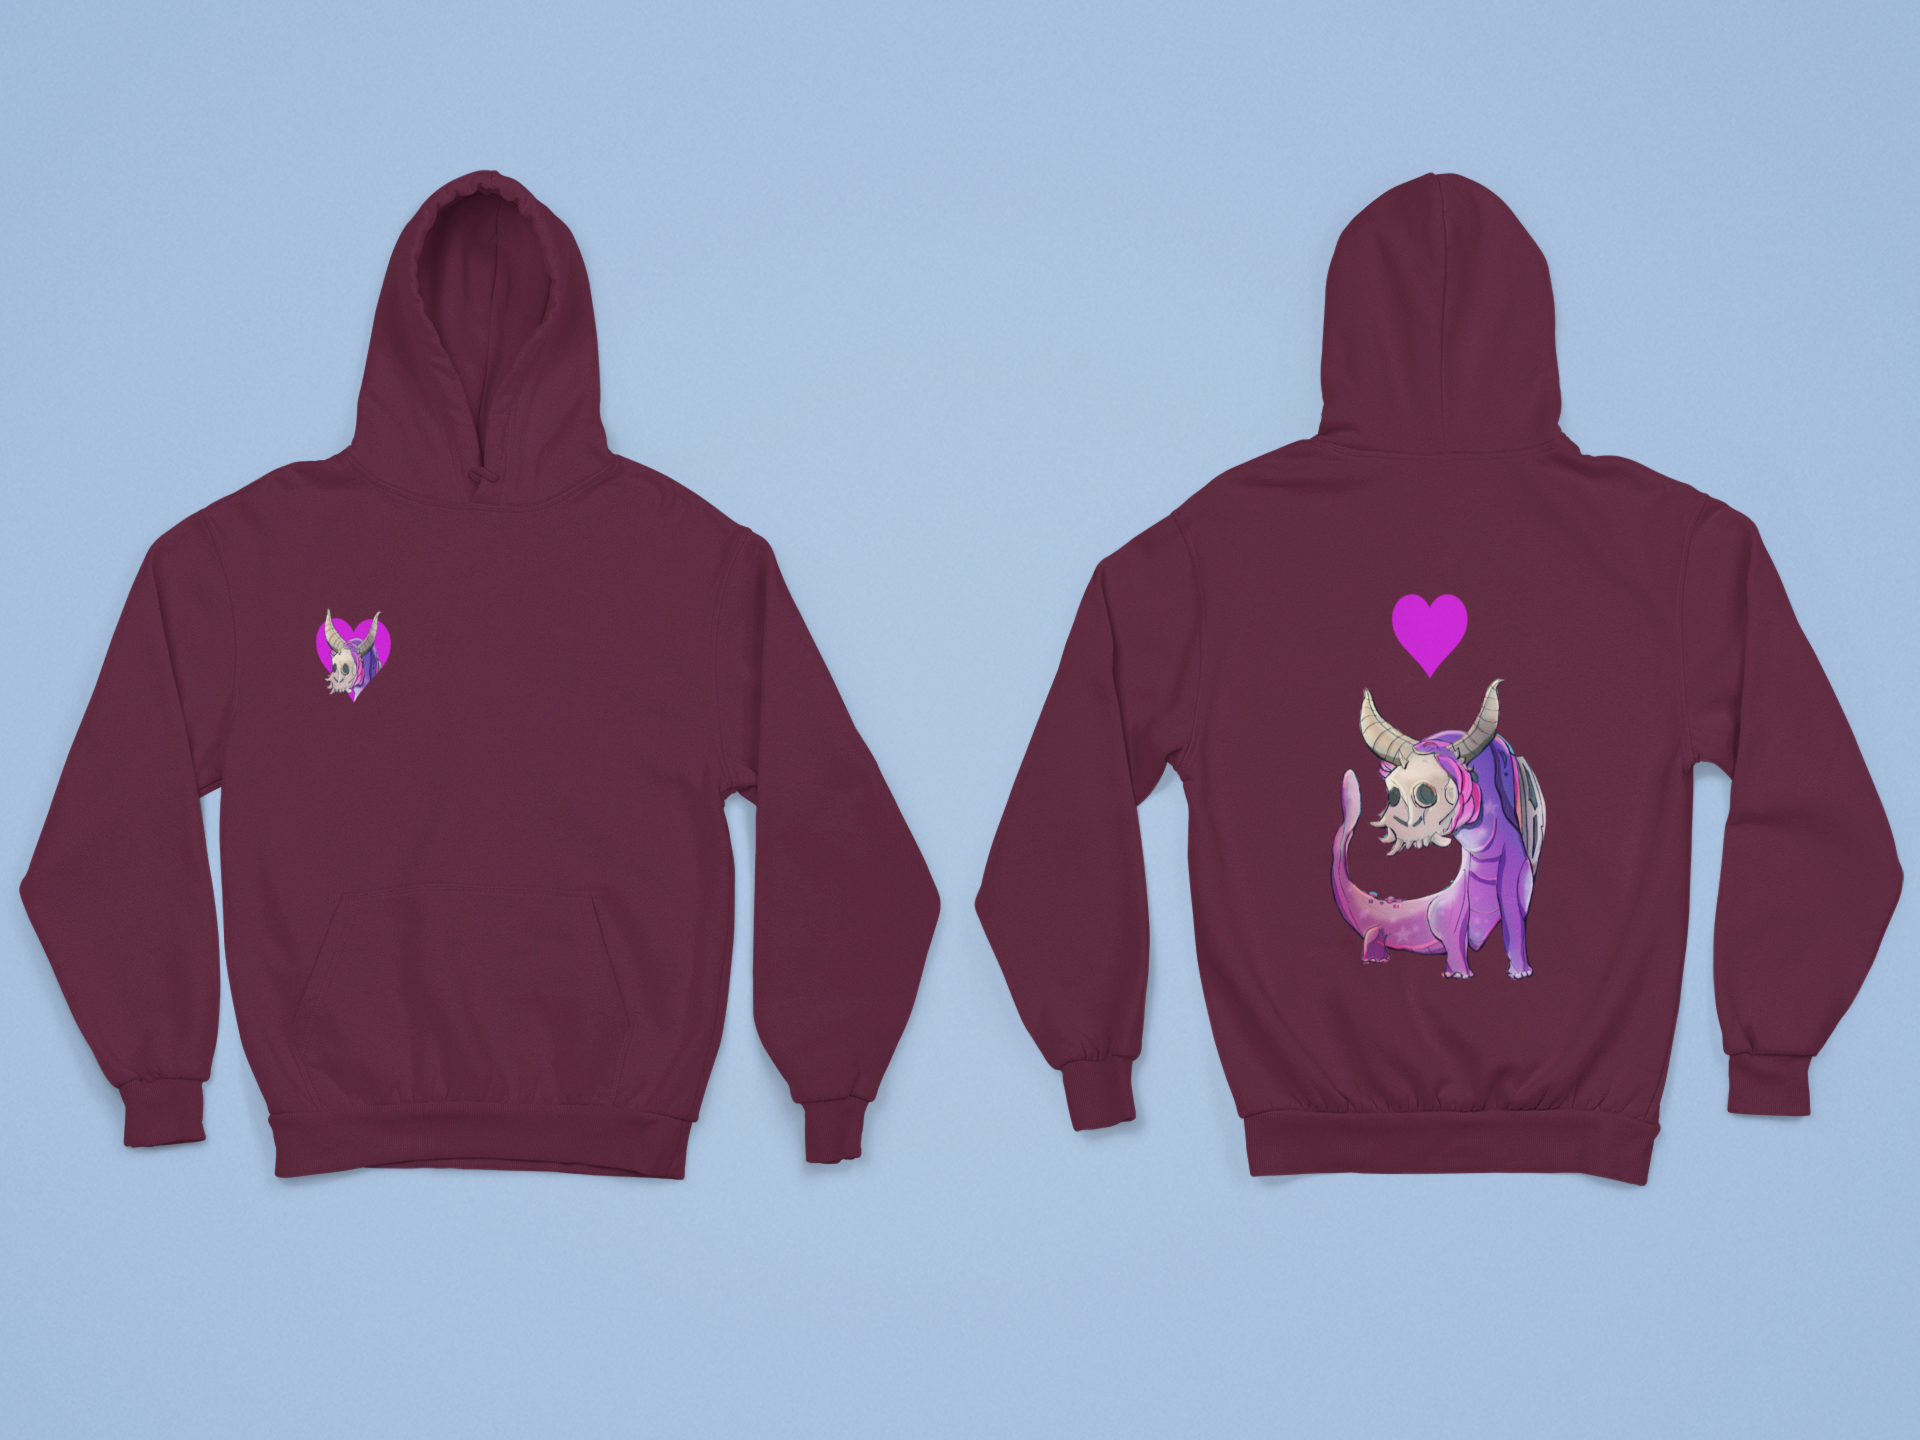 A image showing the front and back of the two designs used on the hoodie,Maroon hoodie. On front a pocket sized graphic of  a horned creature sticking its head through the heart.On back A purple horned salamander type creature heart above creatures head 